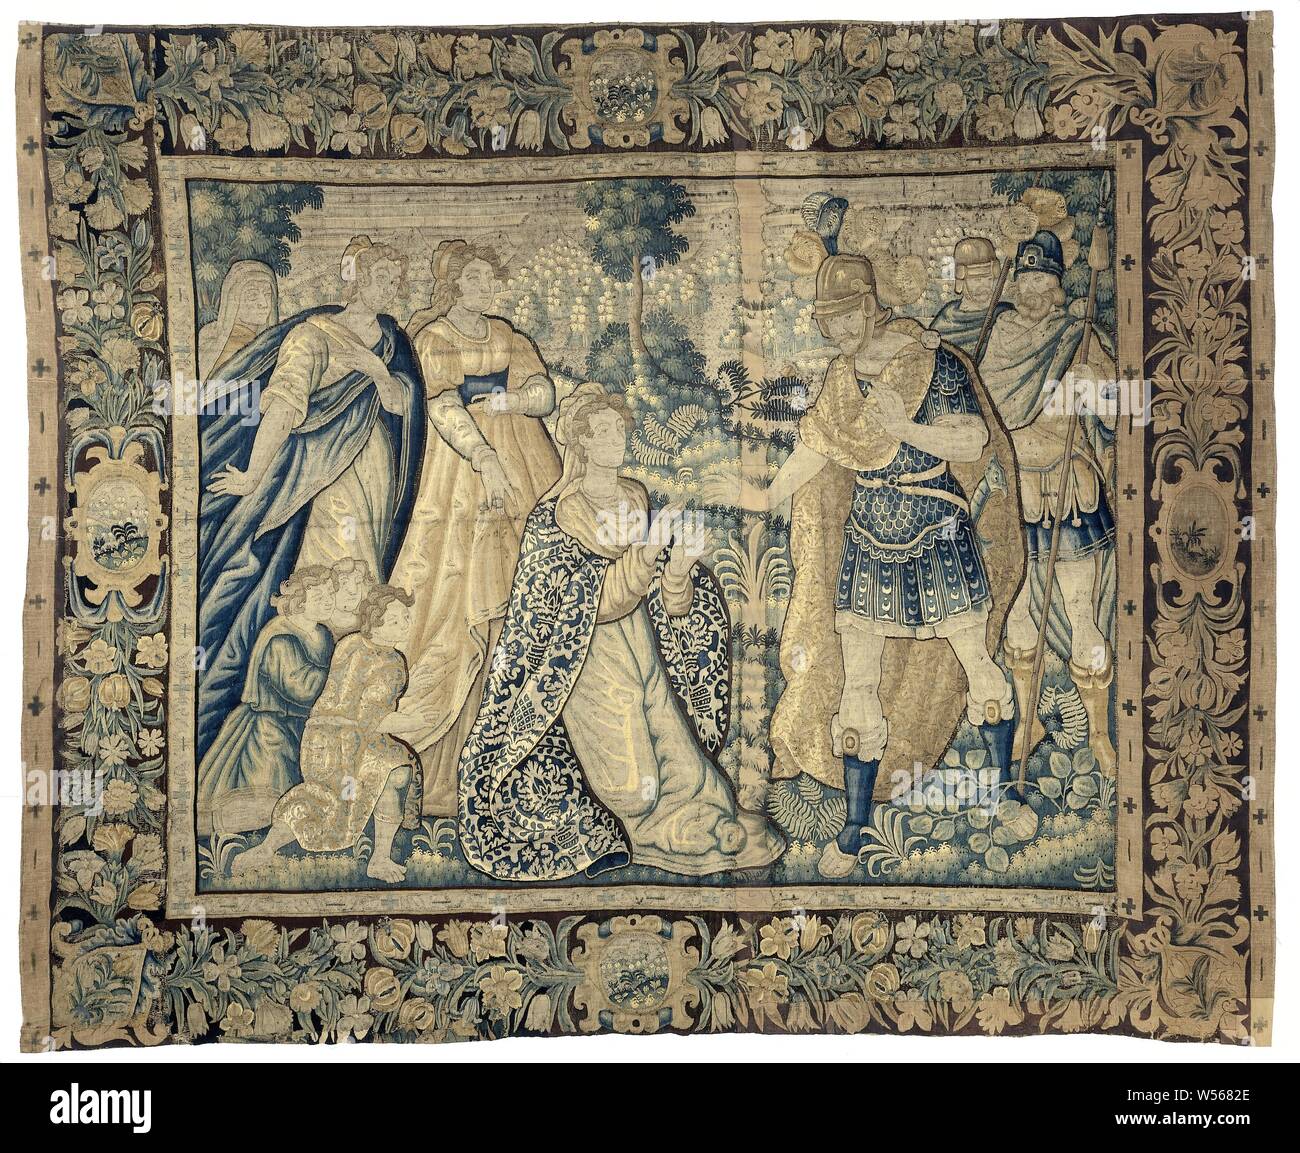 The family of Darius for Alexander, The history of Alexander the Great (series title), Tapestry with the Darius family for Alexander, from a series with the history of Alexander the Great., anonymous, Southern Netherlands, c. 1625 - c. 1650, ketting, inslag, tapestry, h 326.0 cm × w 397.0 cm Stock Photo